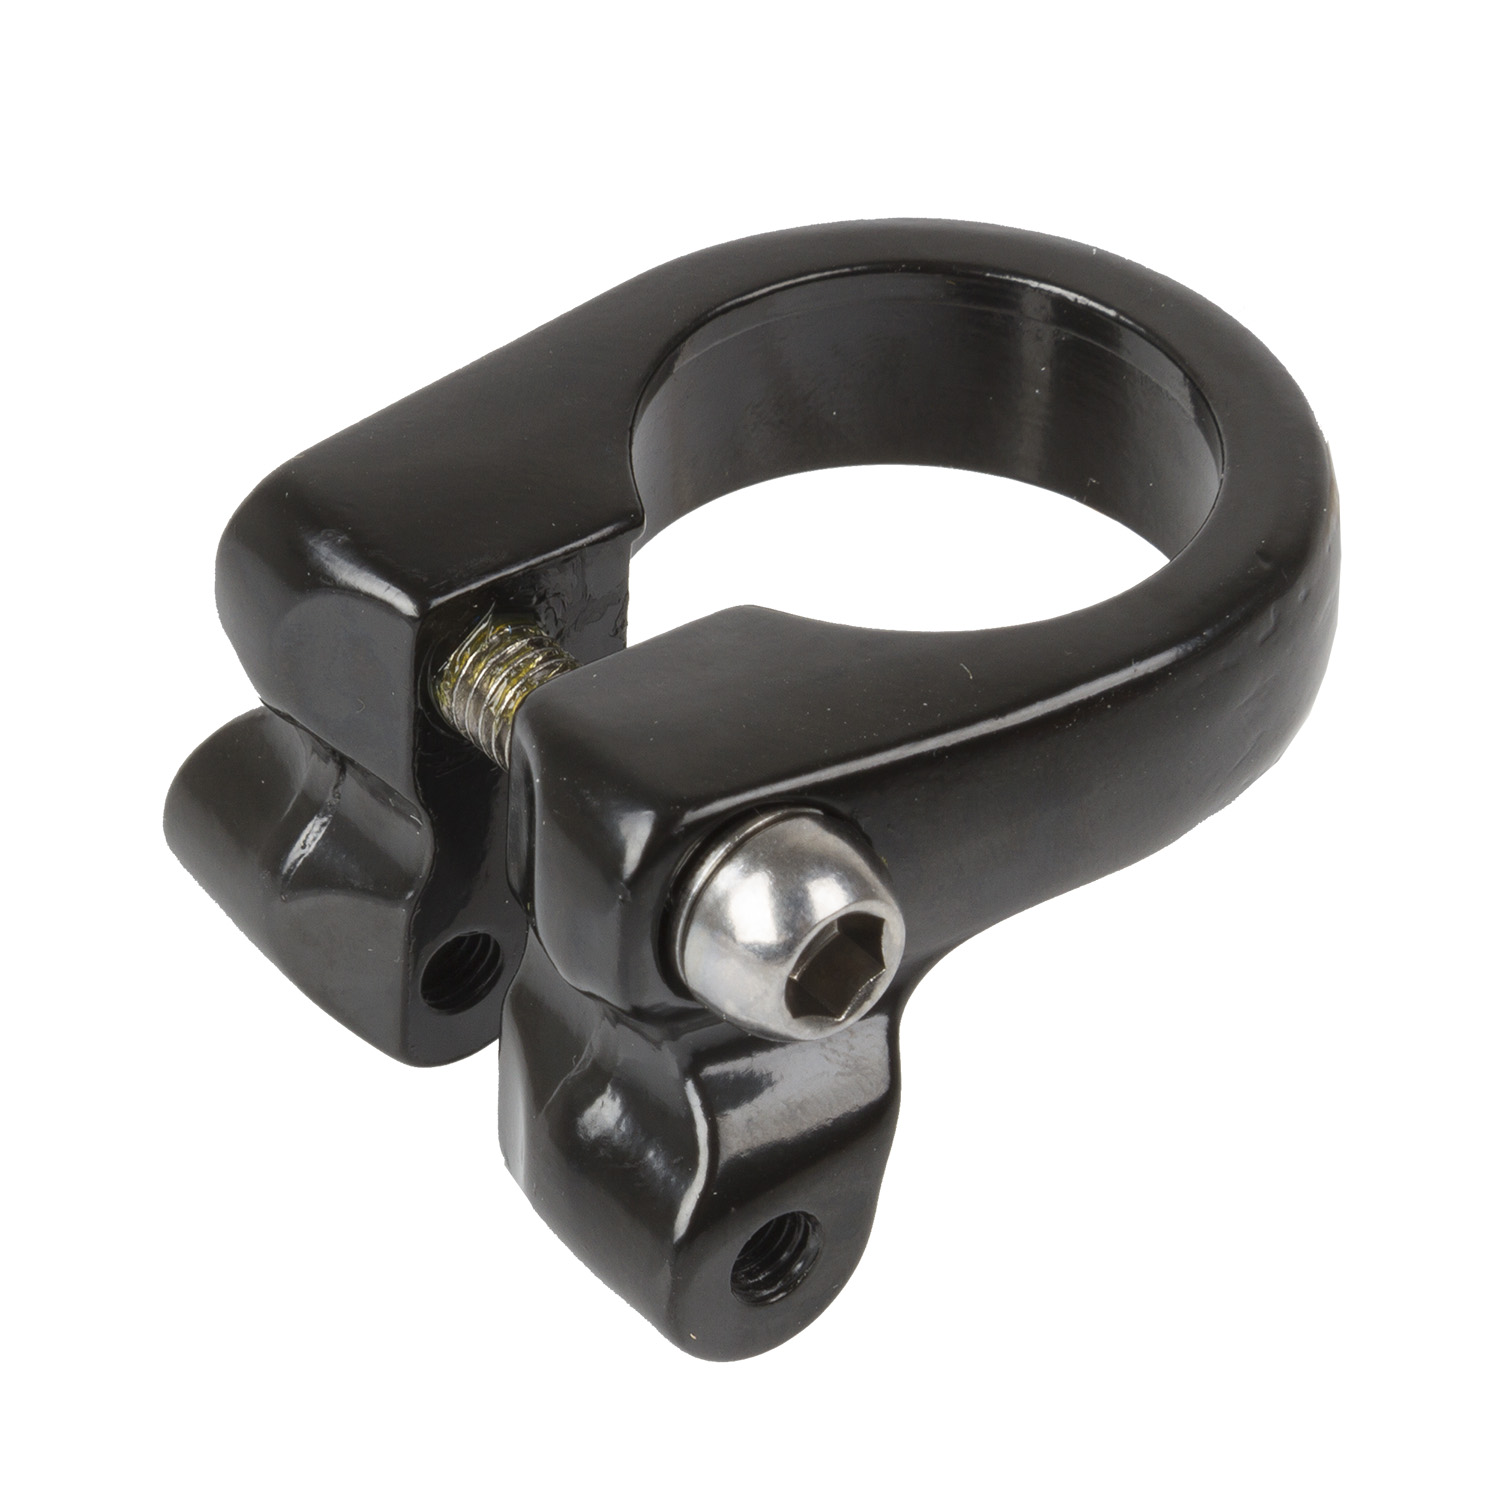 250850 M-WAVE Racky seat tube clamp – AVAILABLE IN SELECTED BIKE SHOP